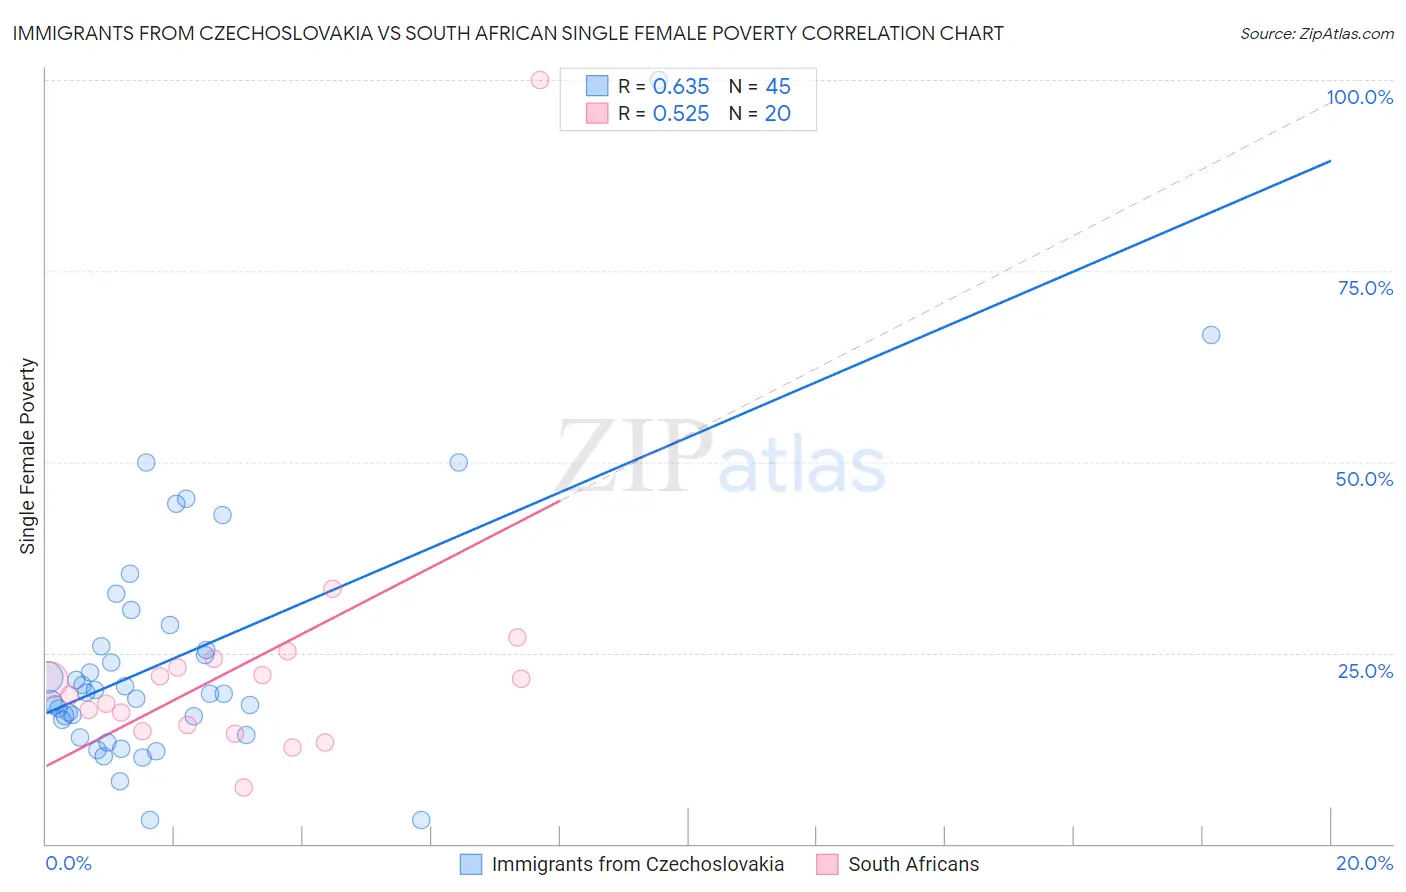 Immigrants from Czechoslovakia vs South African Single Female Poverty